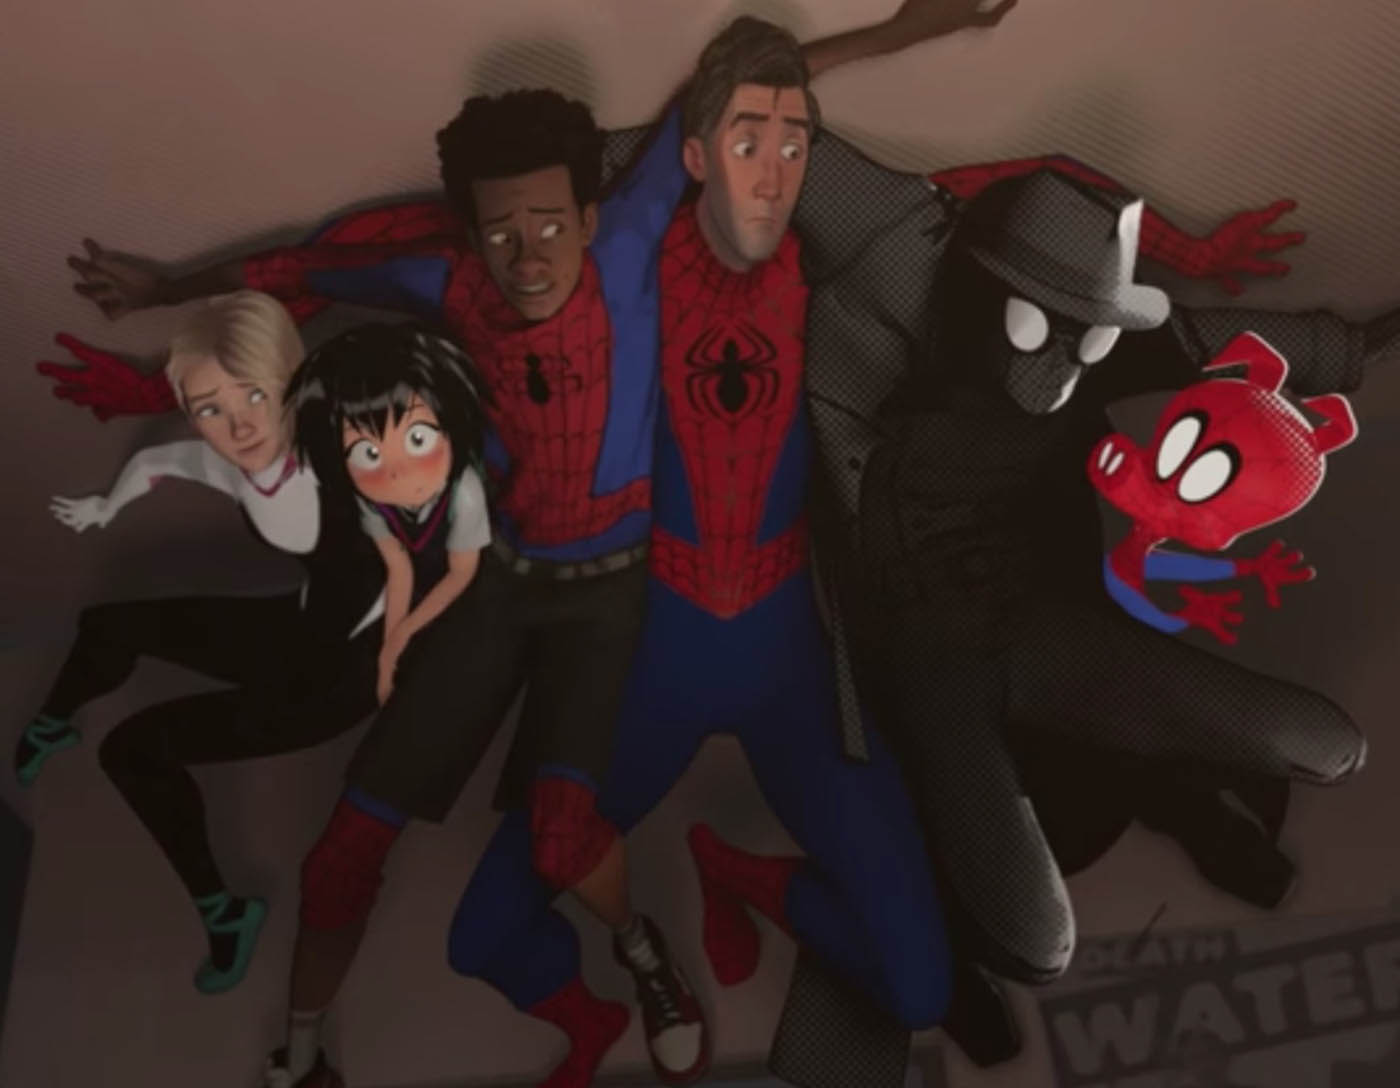 Into the Spider-Verse Film Review